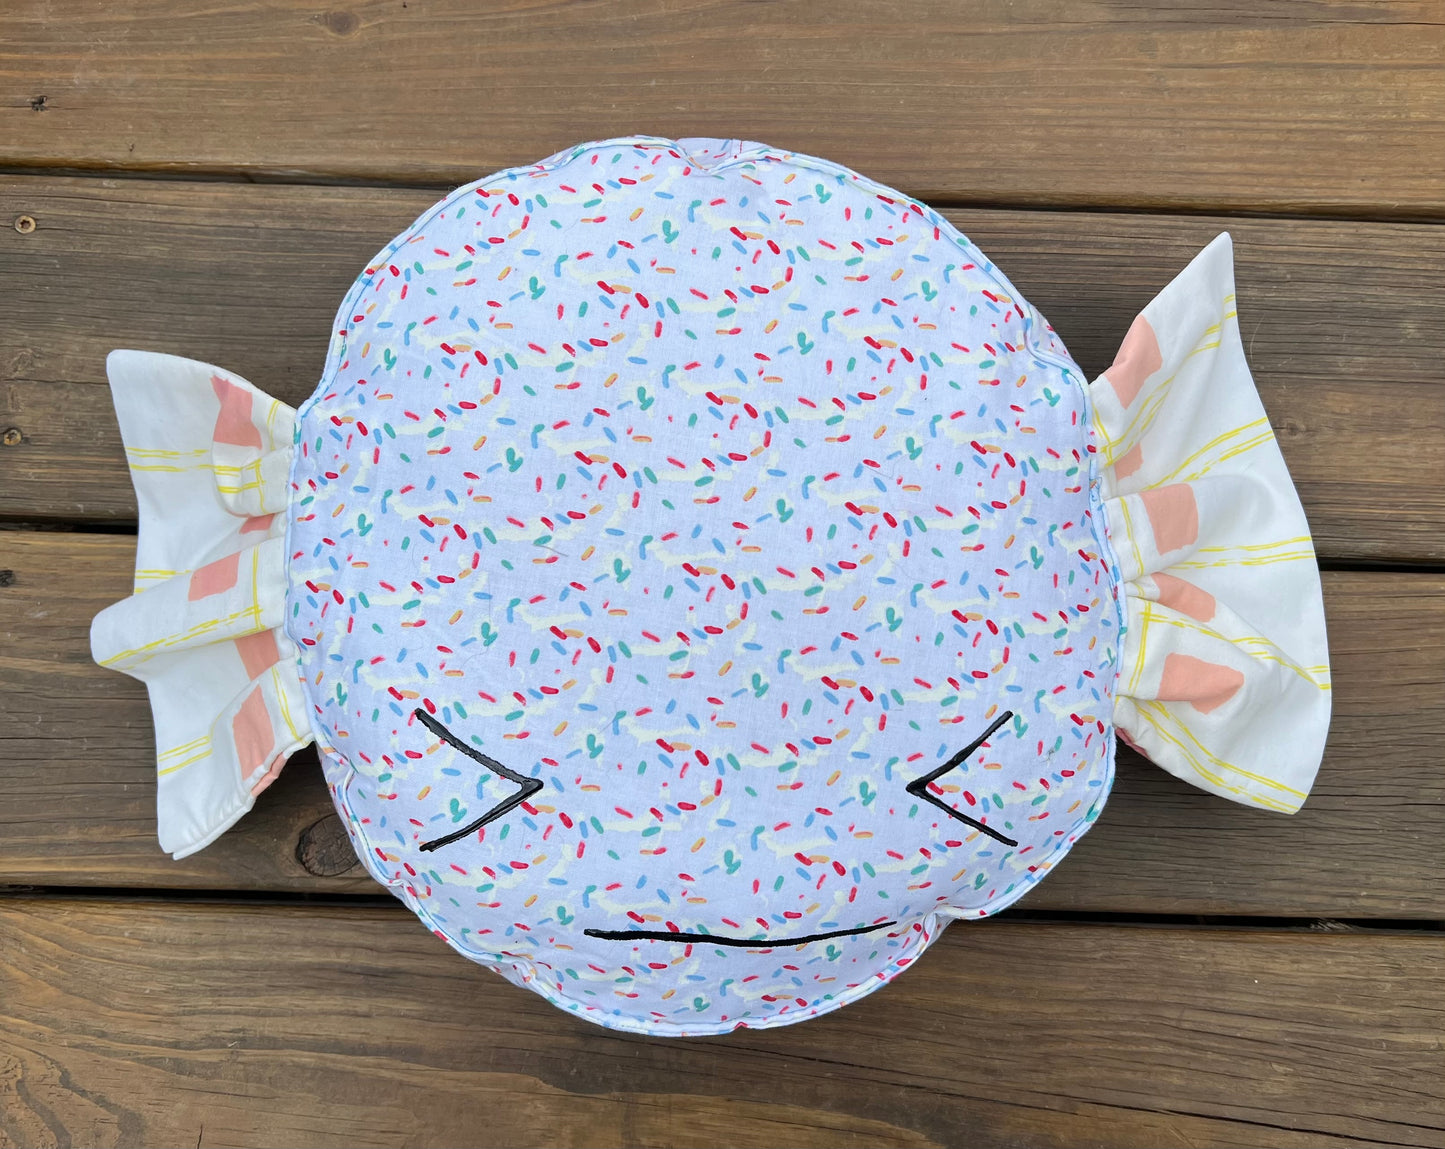 Sprinkle Delight candy pillow, against a wood background, with a painted face.